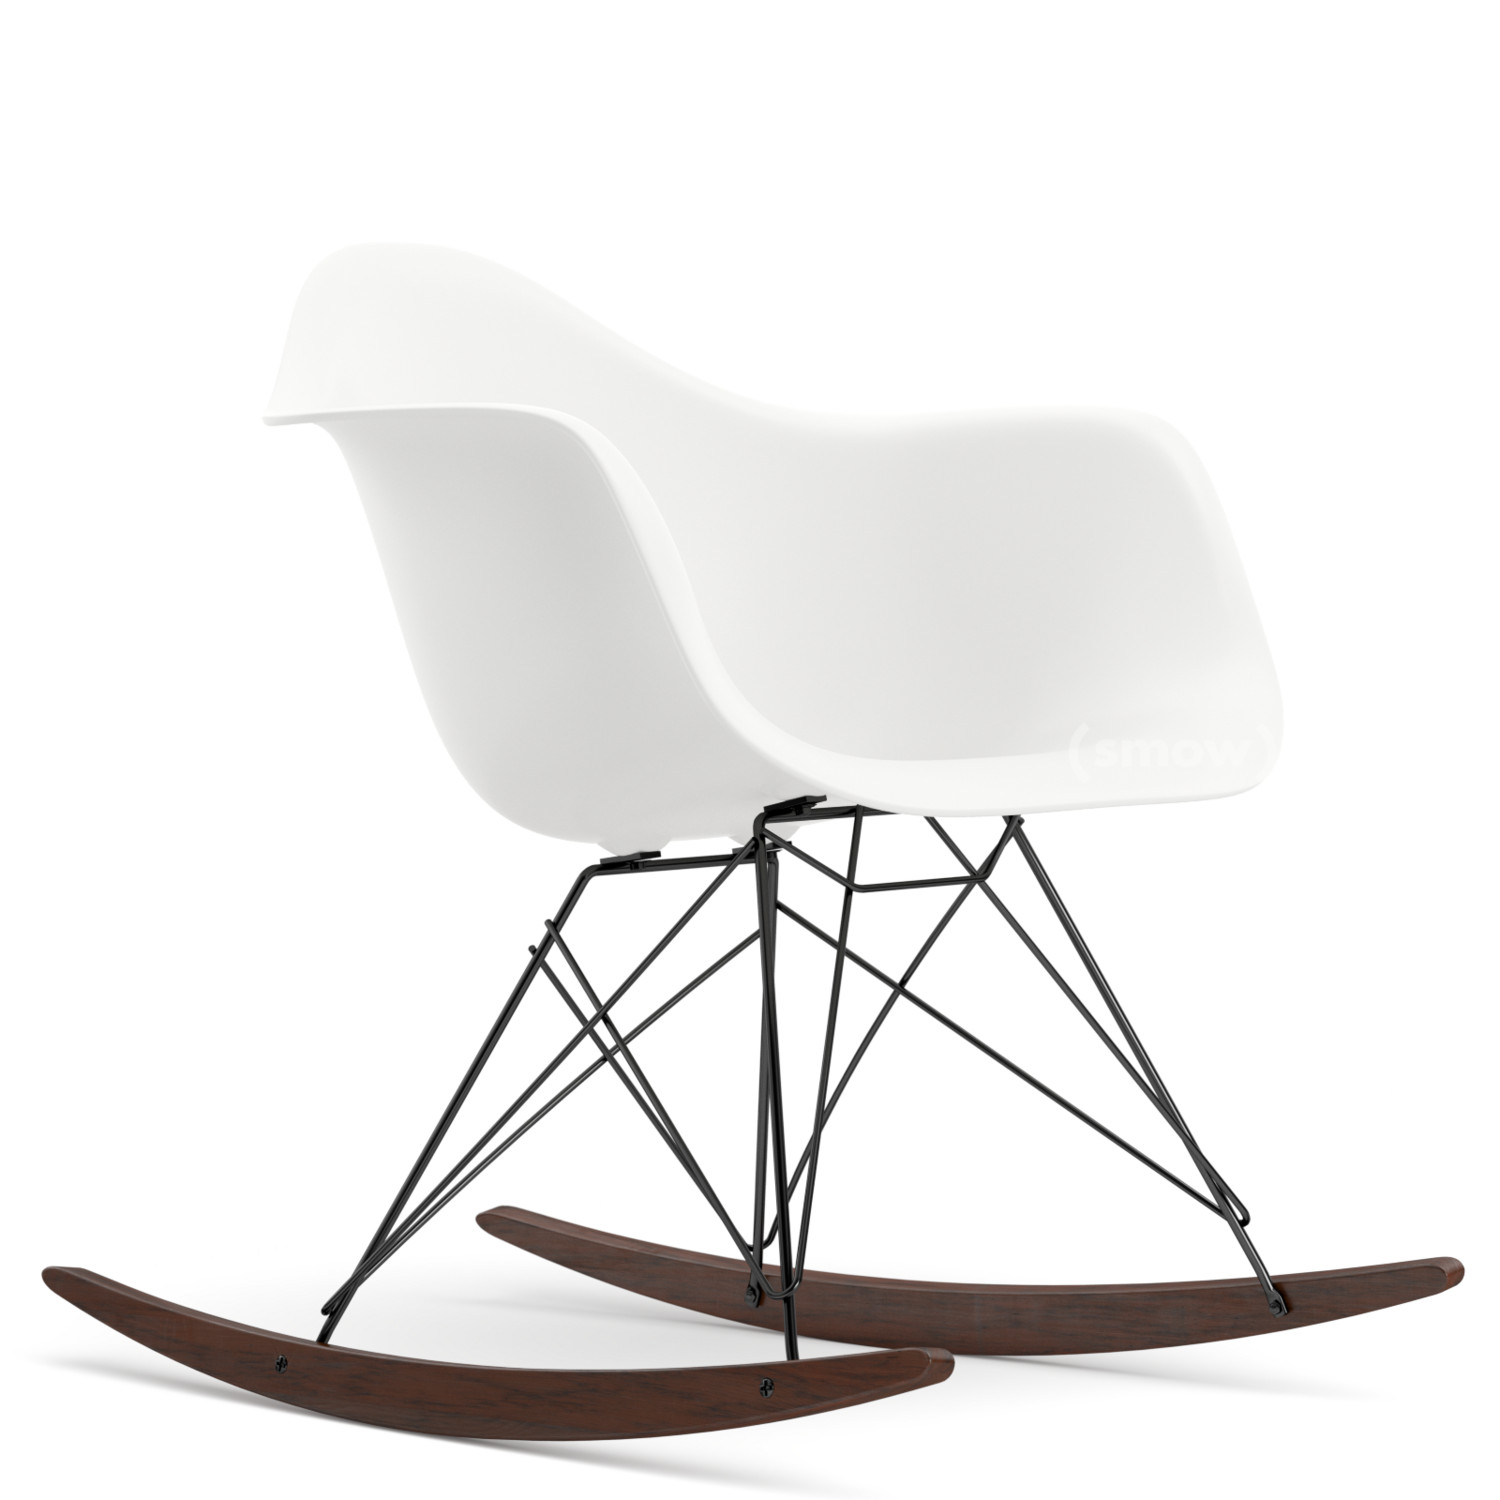 met tijd fluit Bank Vitra Eames Plastic Armchair RAR by Charles & Ray Eames, 1950 - Designer  furniture by smow.com